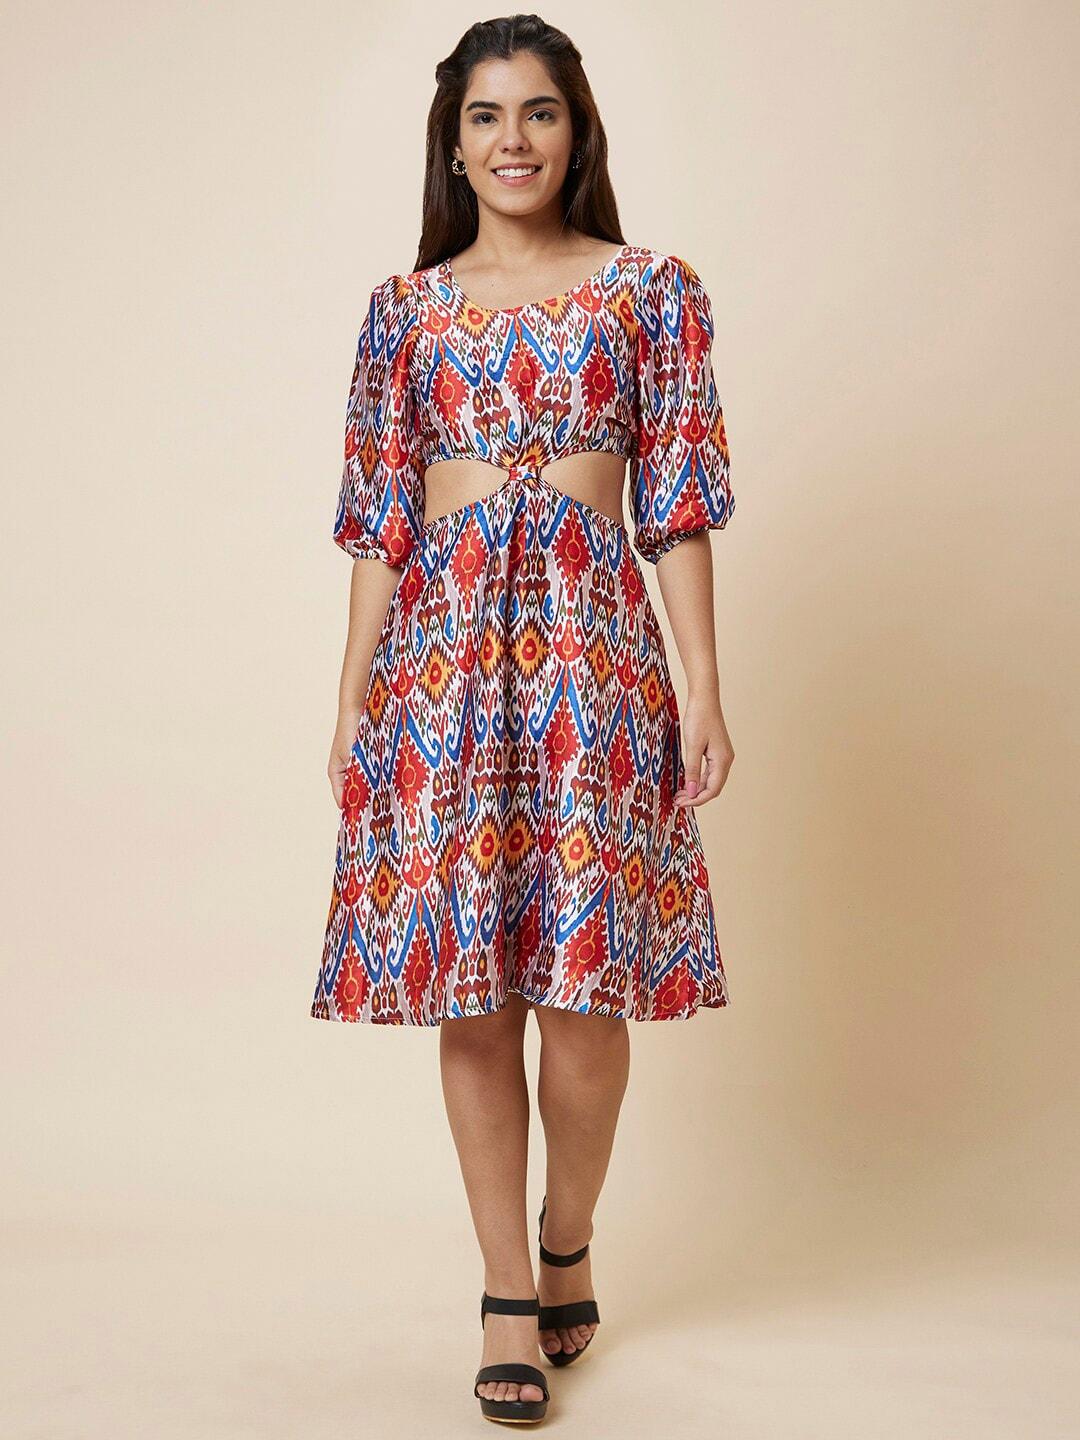 globus-red-&-white-ethnic-motif-printed-puff-sleeve-cut-out-a-line-dress